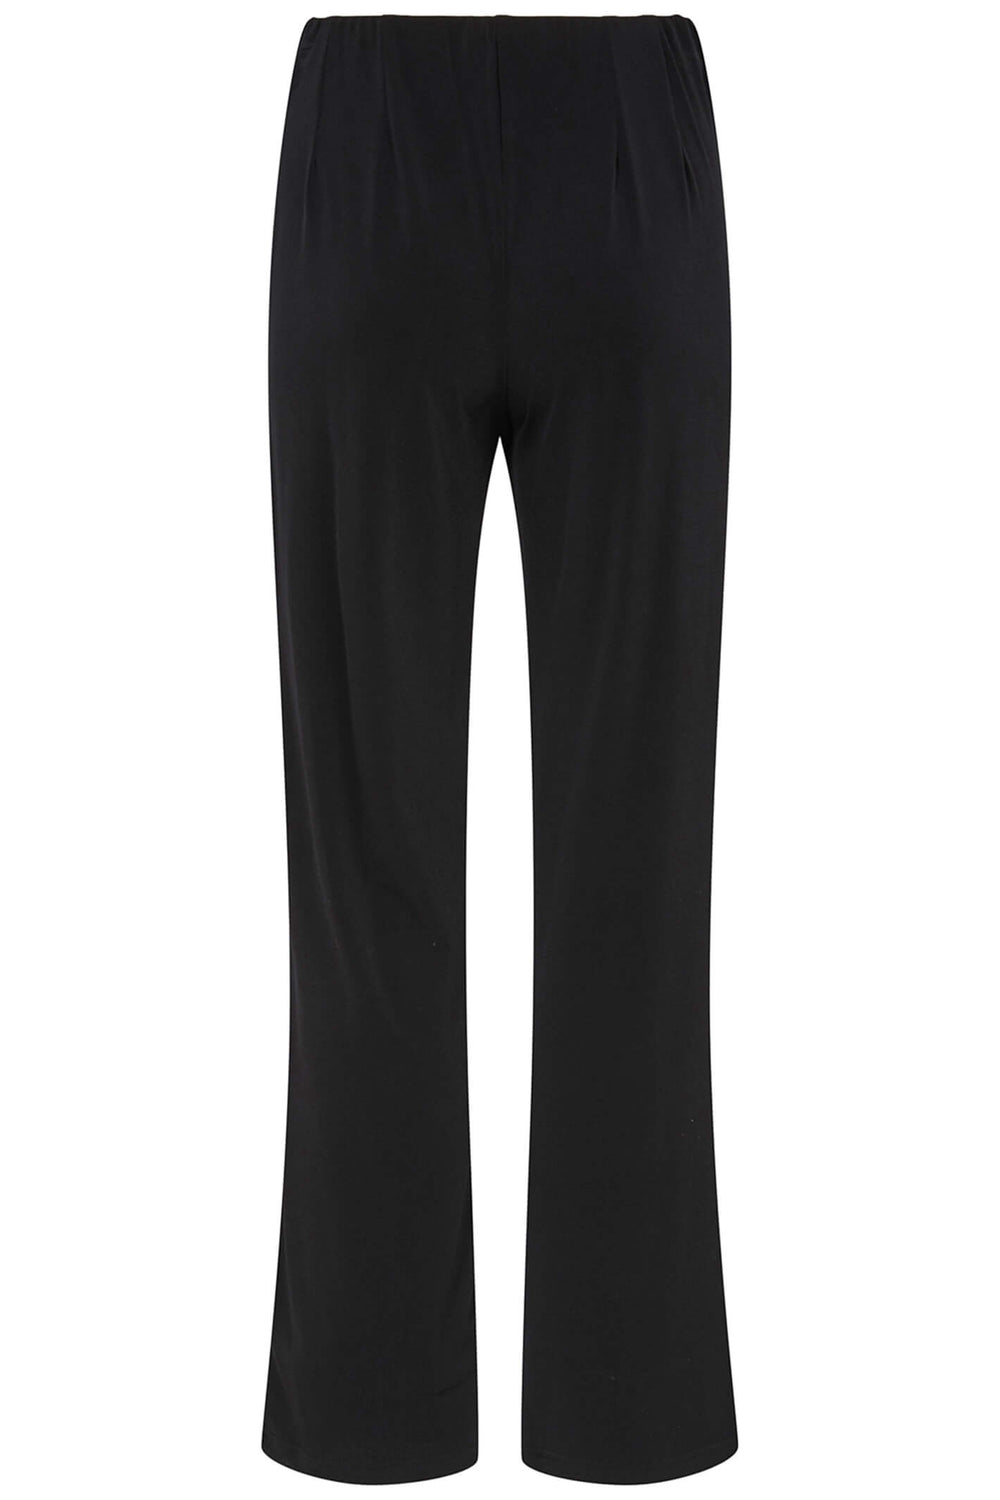 Tia 71179 6903 Black Pull-On Wide Leg Trousers - Experience Boutique